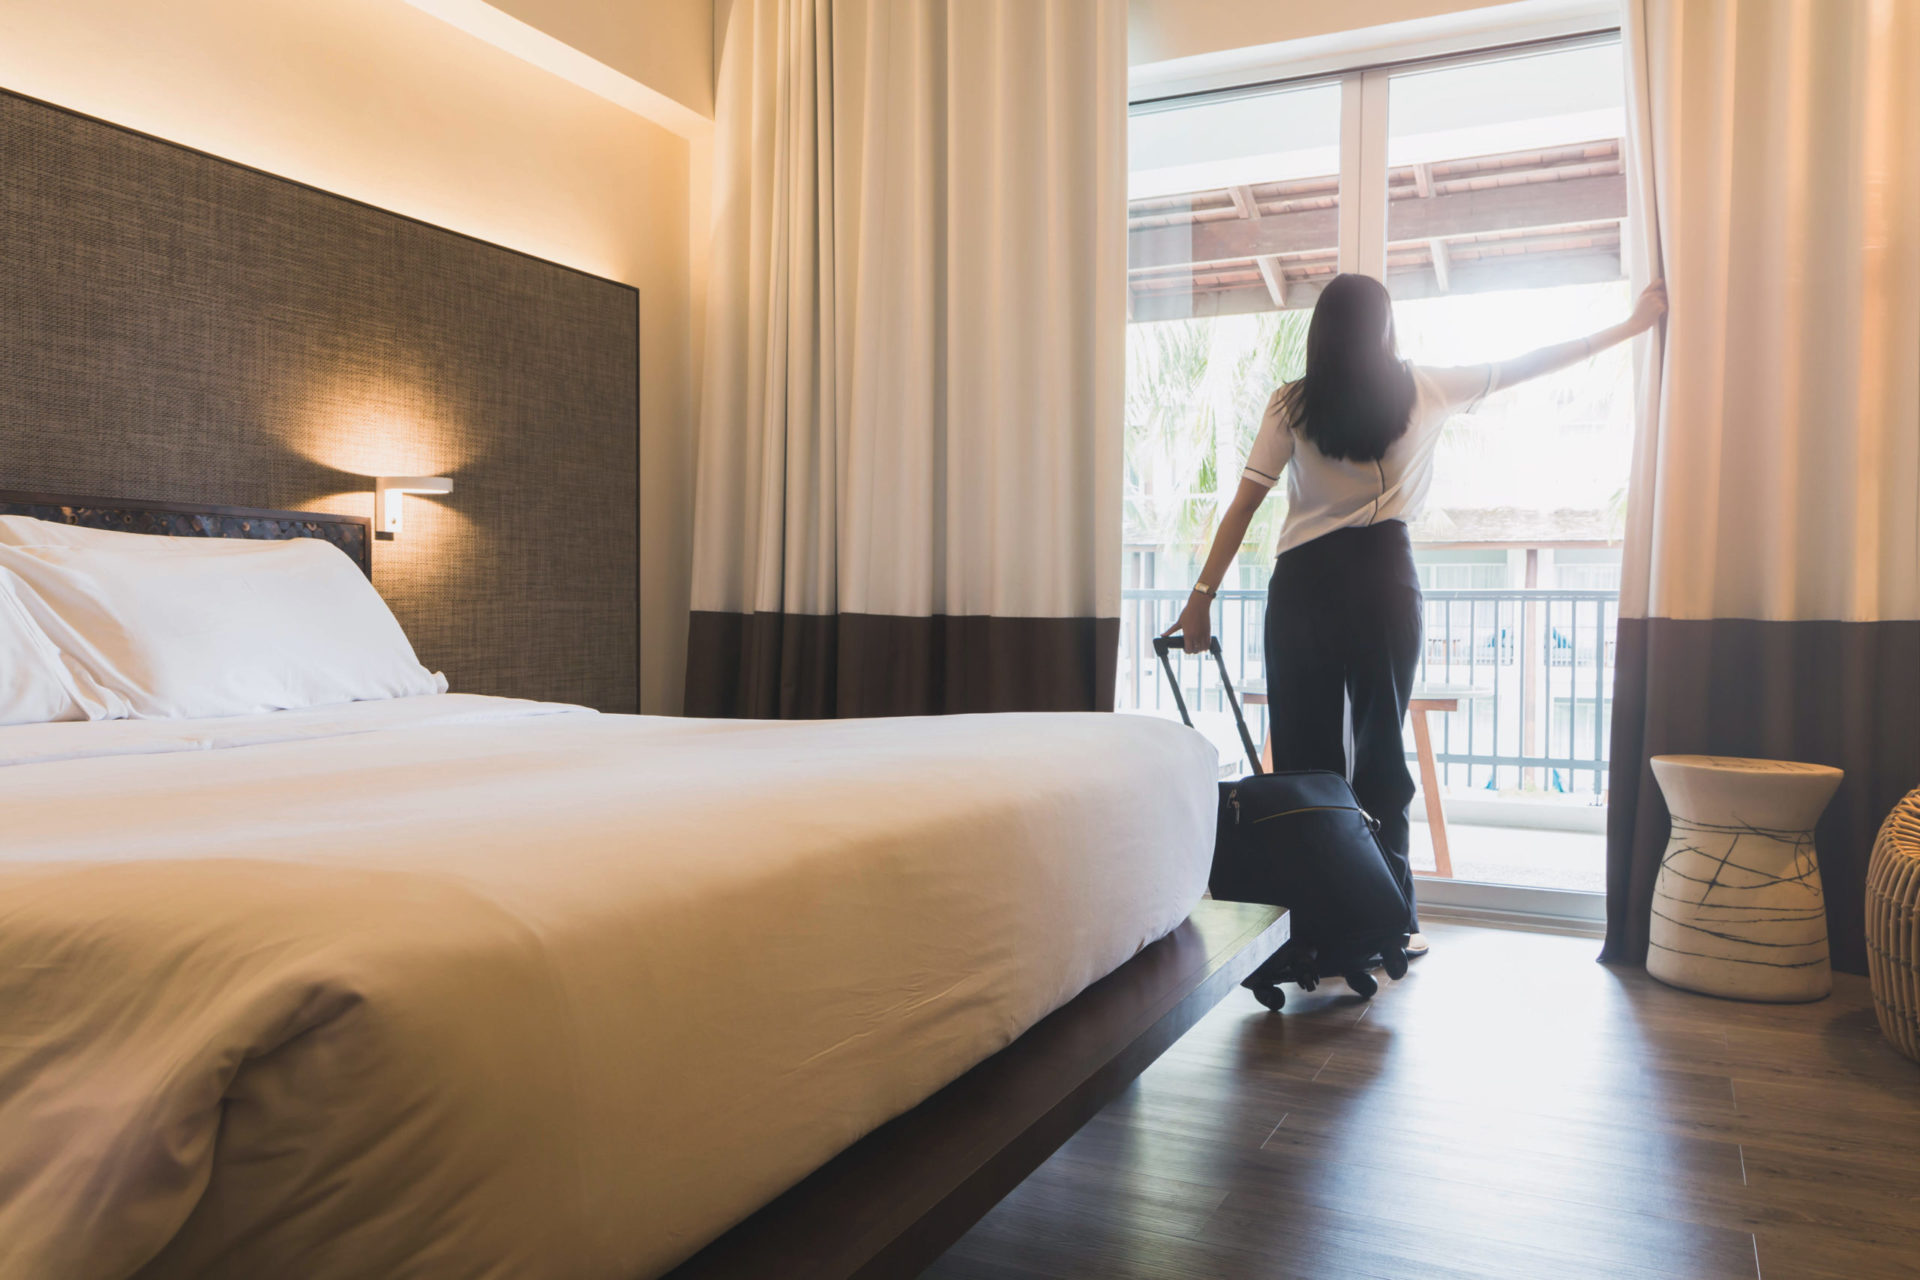 Home away from home: Guest experience in hospitality